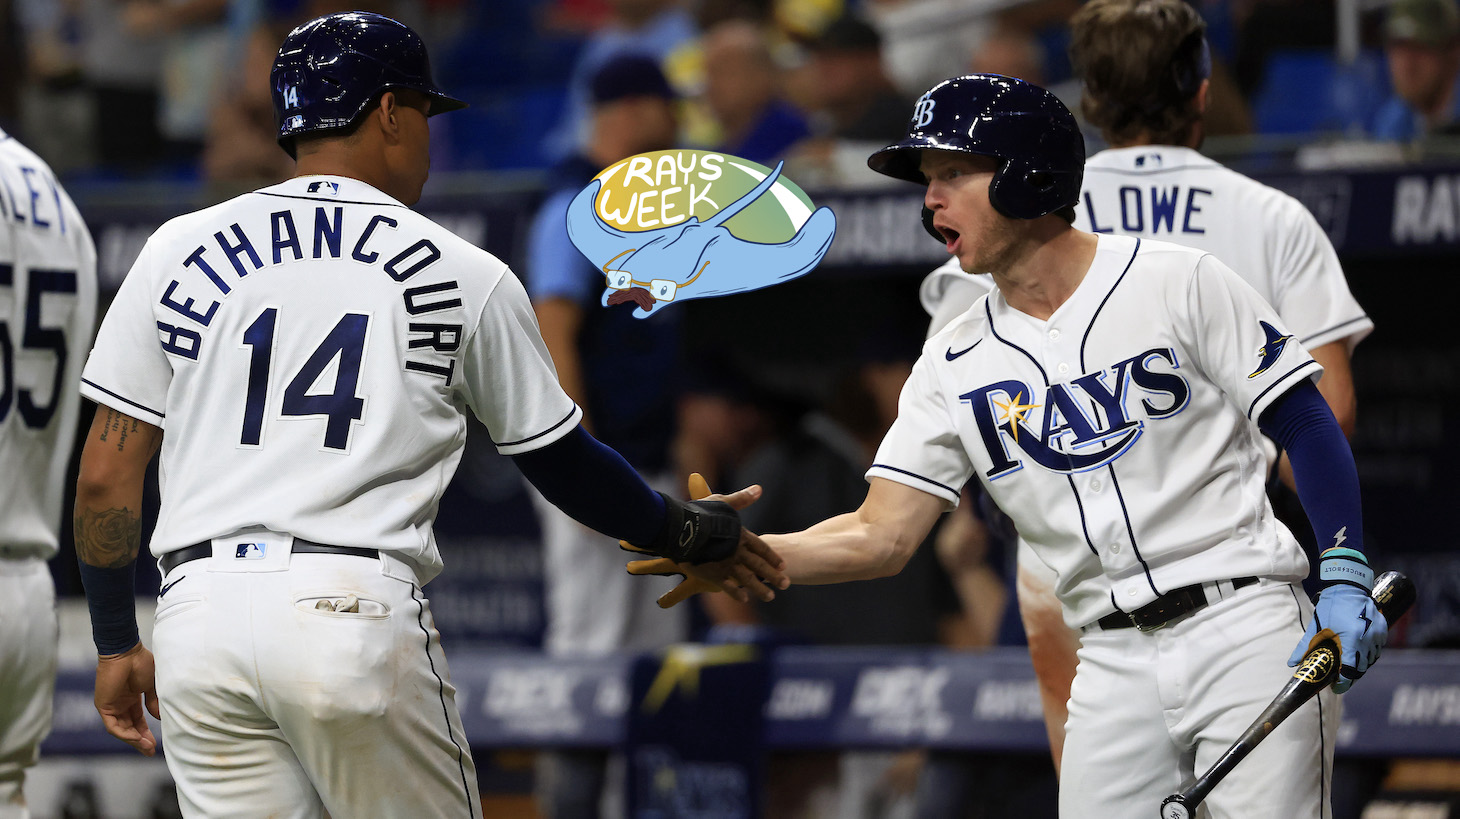 ST PETERSBURG, FLORIDA - JULY 14: Christian Bethancourt #14 of the Tampa Bay Rays is congratulated after scoring a run in the seventh inning during a game against the Boston Red Sox at Tropicana Field on July 14, 2022 in St Petersburg, Florida. (Photo by Mike Ehrmann/Getty Images)